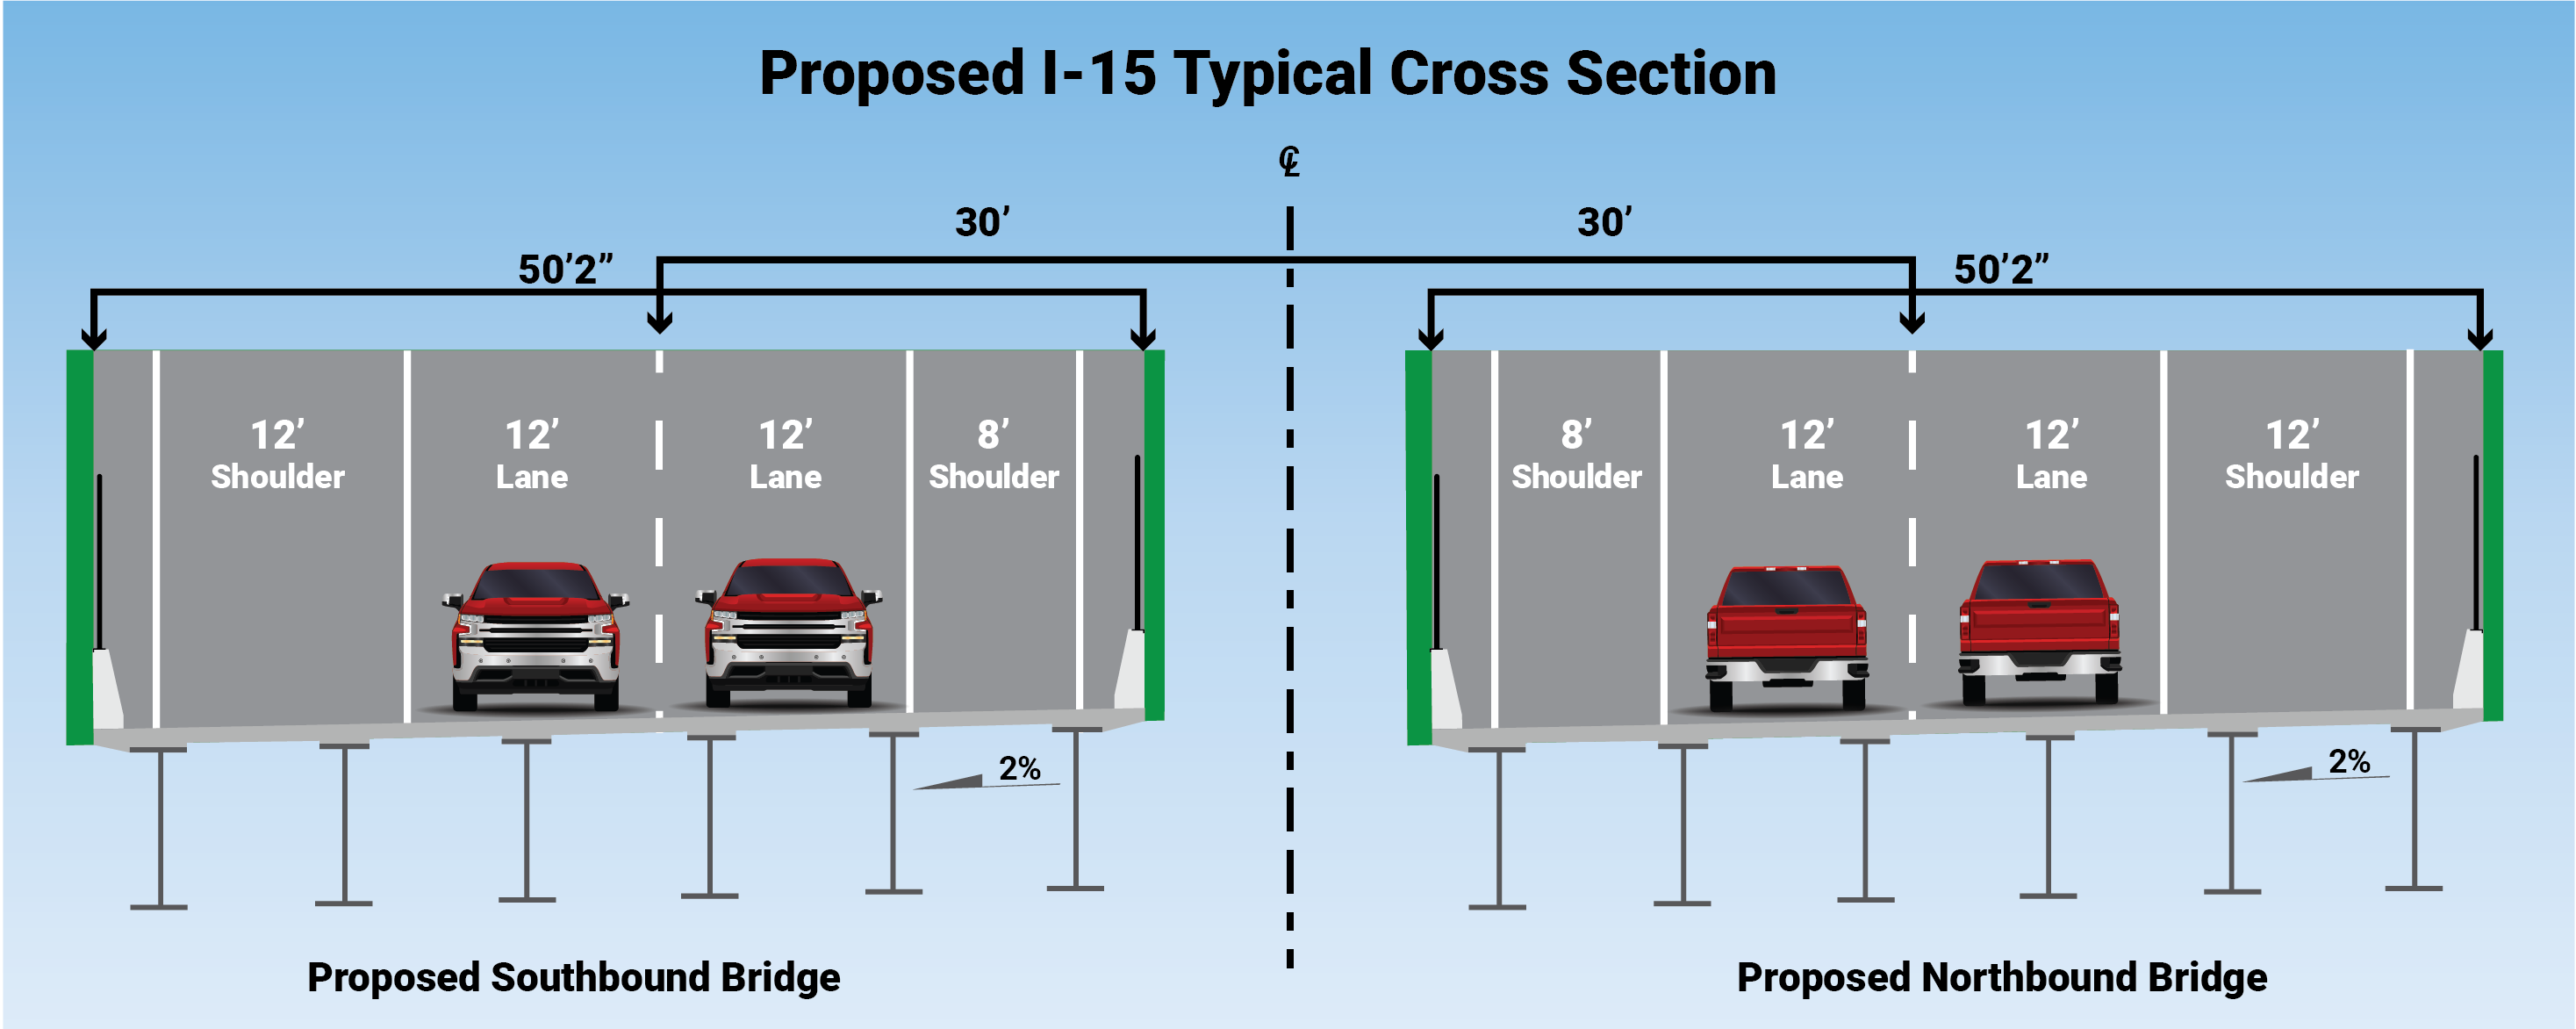 Proposed I-15 Typical Cross sections for Southbound and Northbound bridges. Southbound Bridge includes: 12 foot outside shoulder; two, twelve-foot travel lanes; 8 foot inside shoulder; and a two percent incline. Northbound Bridge includes: 8 foot inside shoulder; two, twelve-foot lanes; 12 foot outside shoulder and a two percent incline.